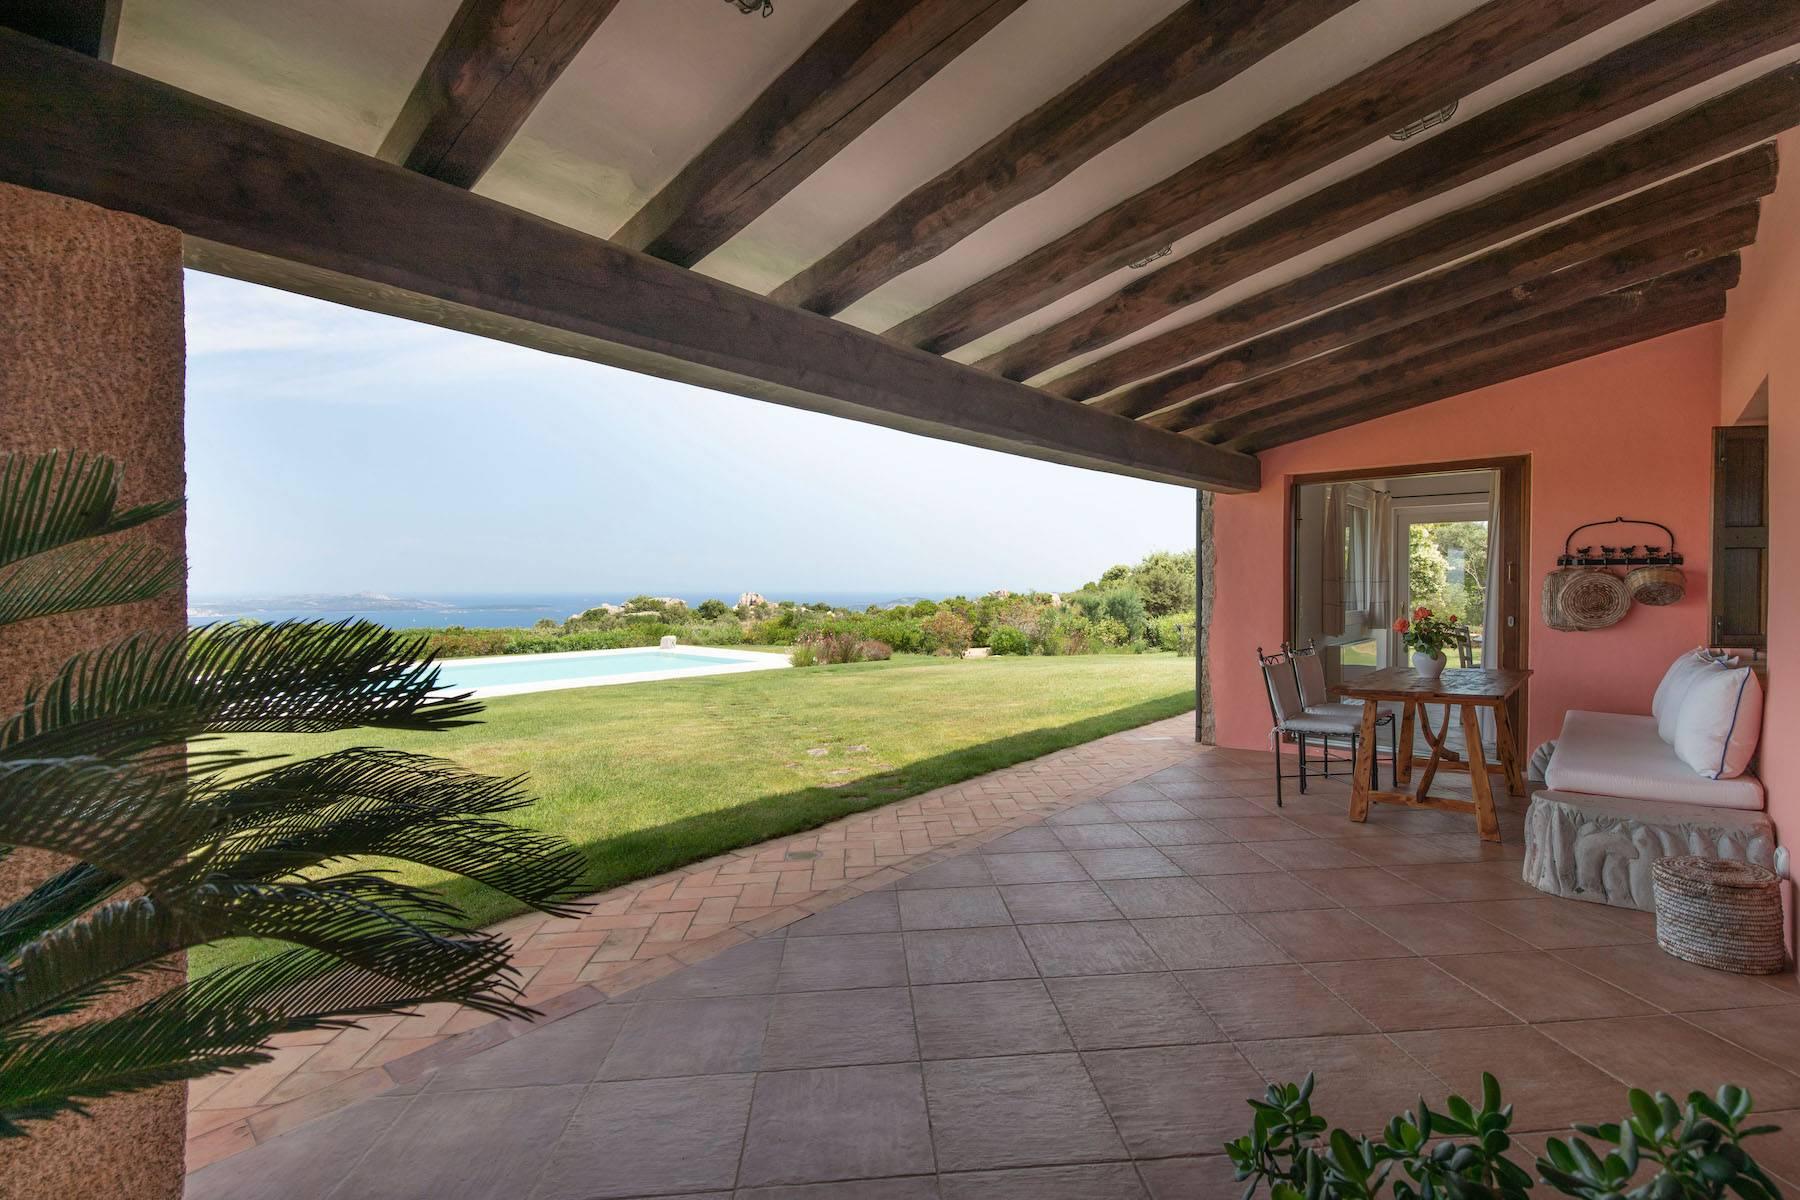 Incredible property of 3 hectares, just a few kilometers from the Costa Smeralda - 8